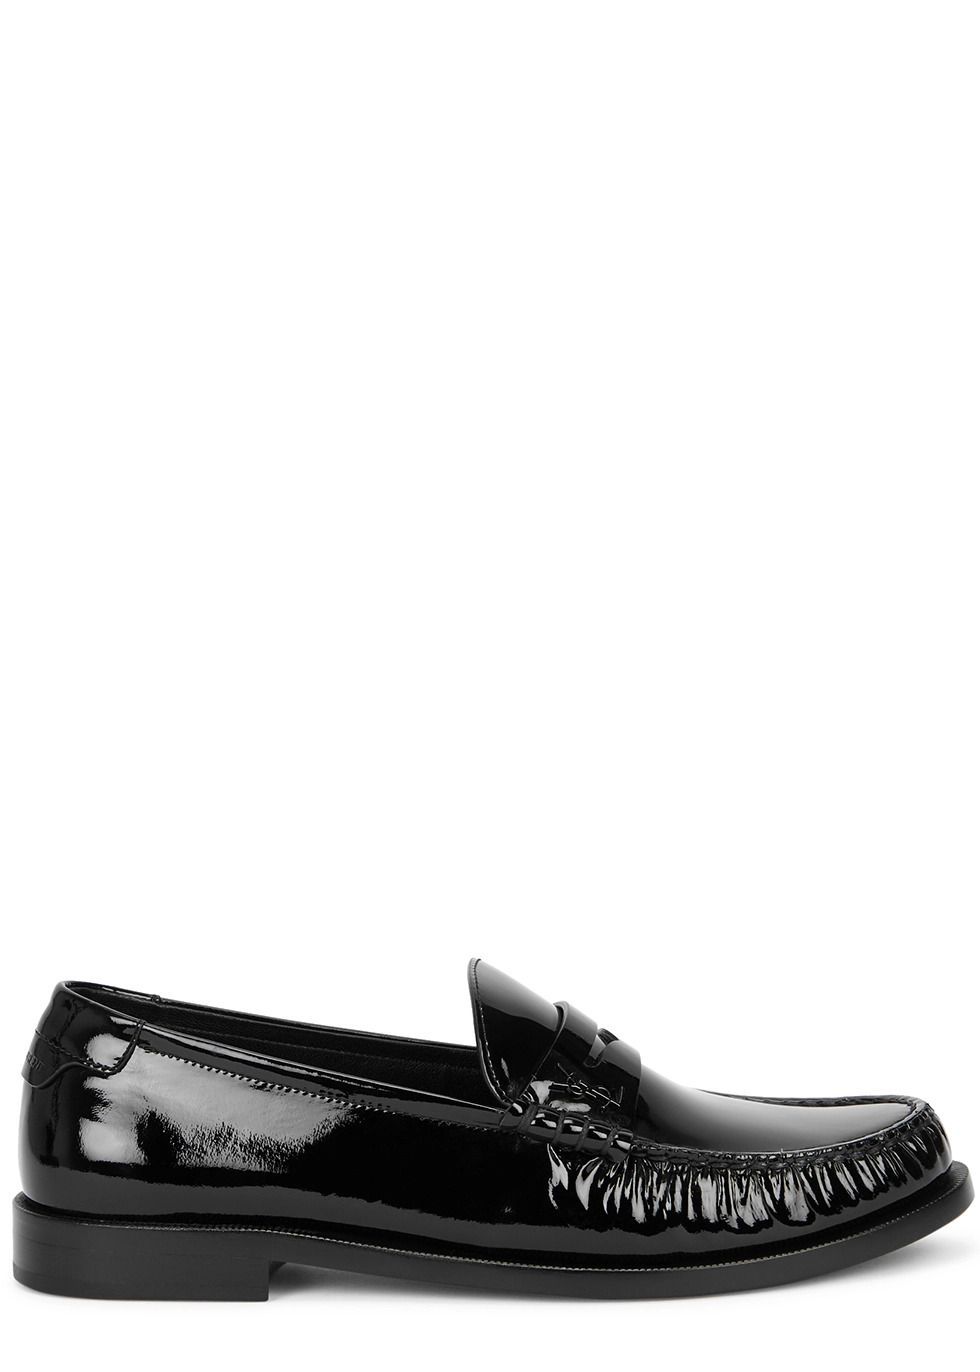 Le Loafer black leather penny loafers